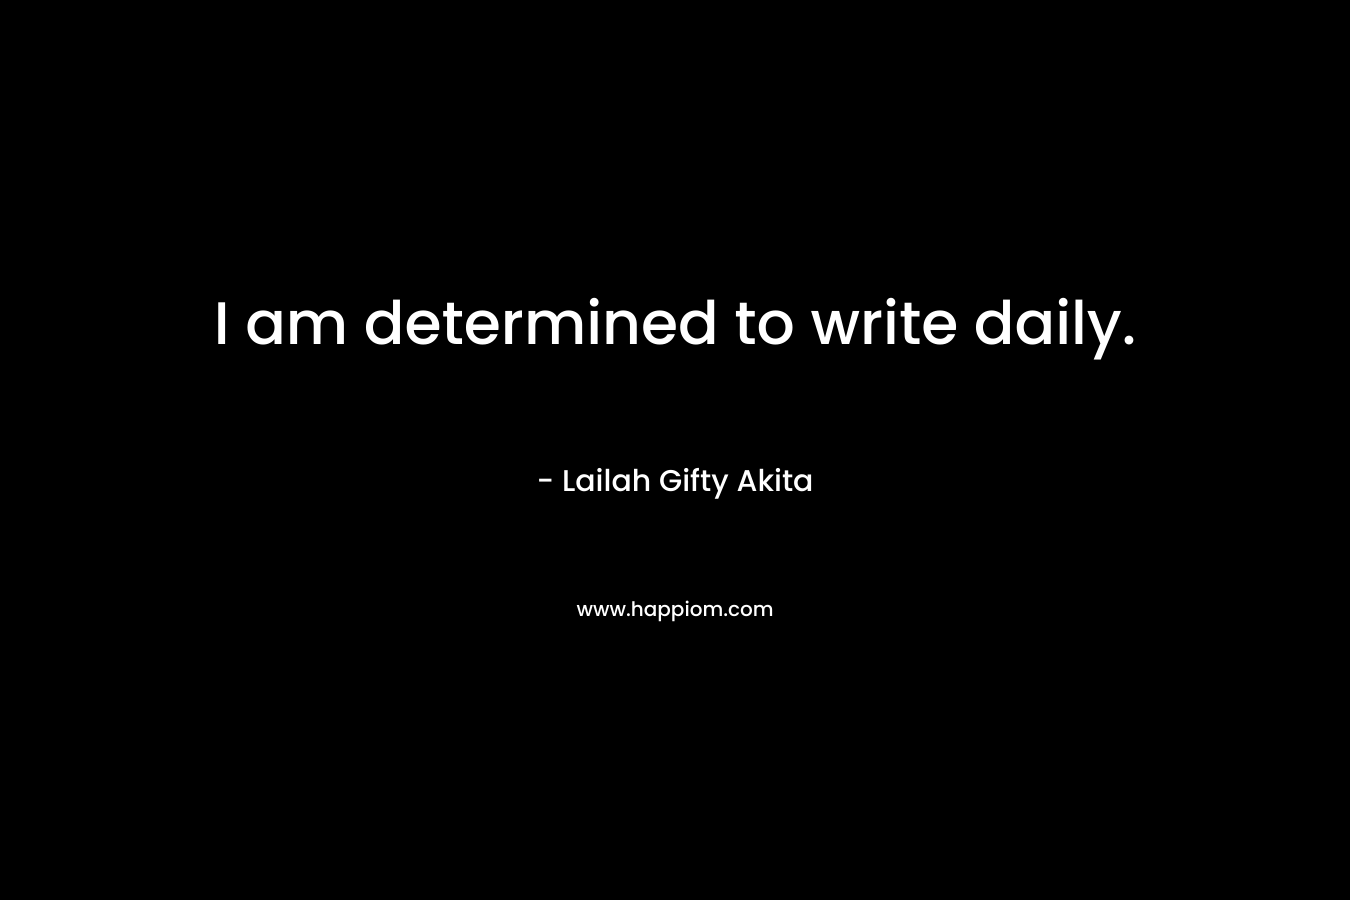 I am determined to write daily.